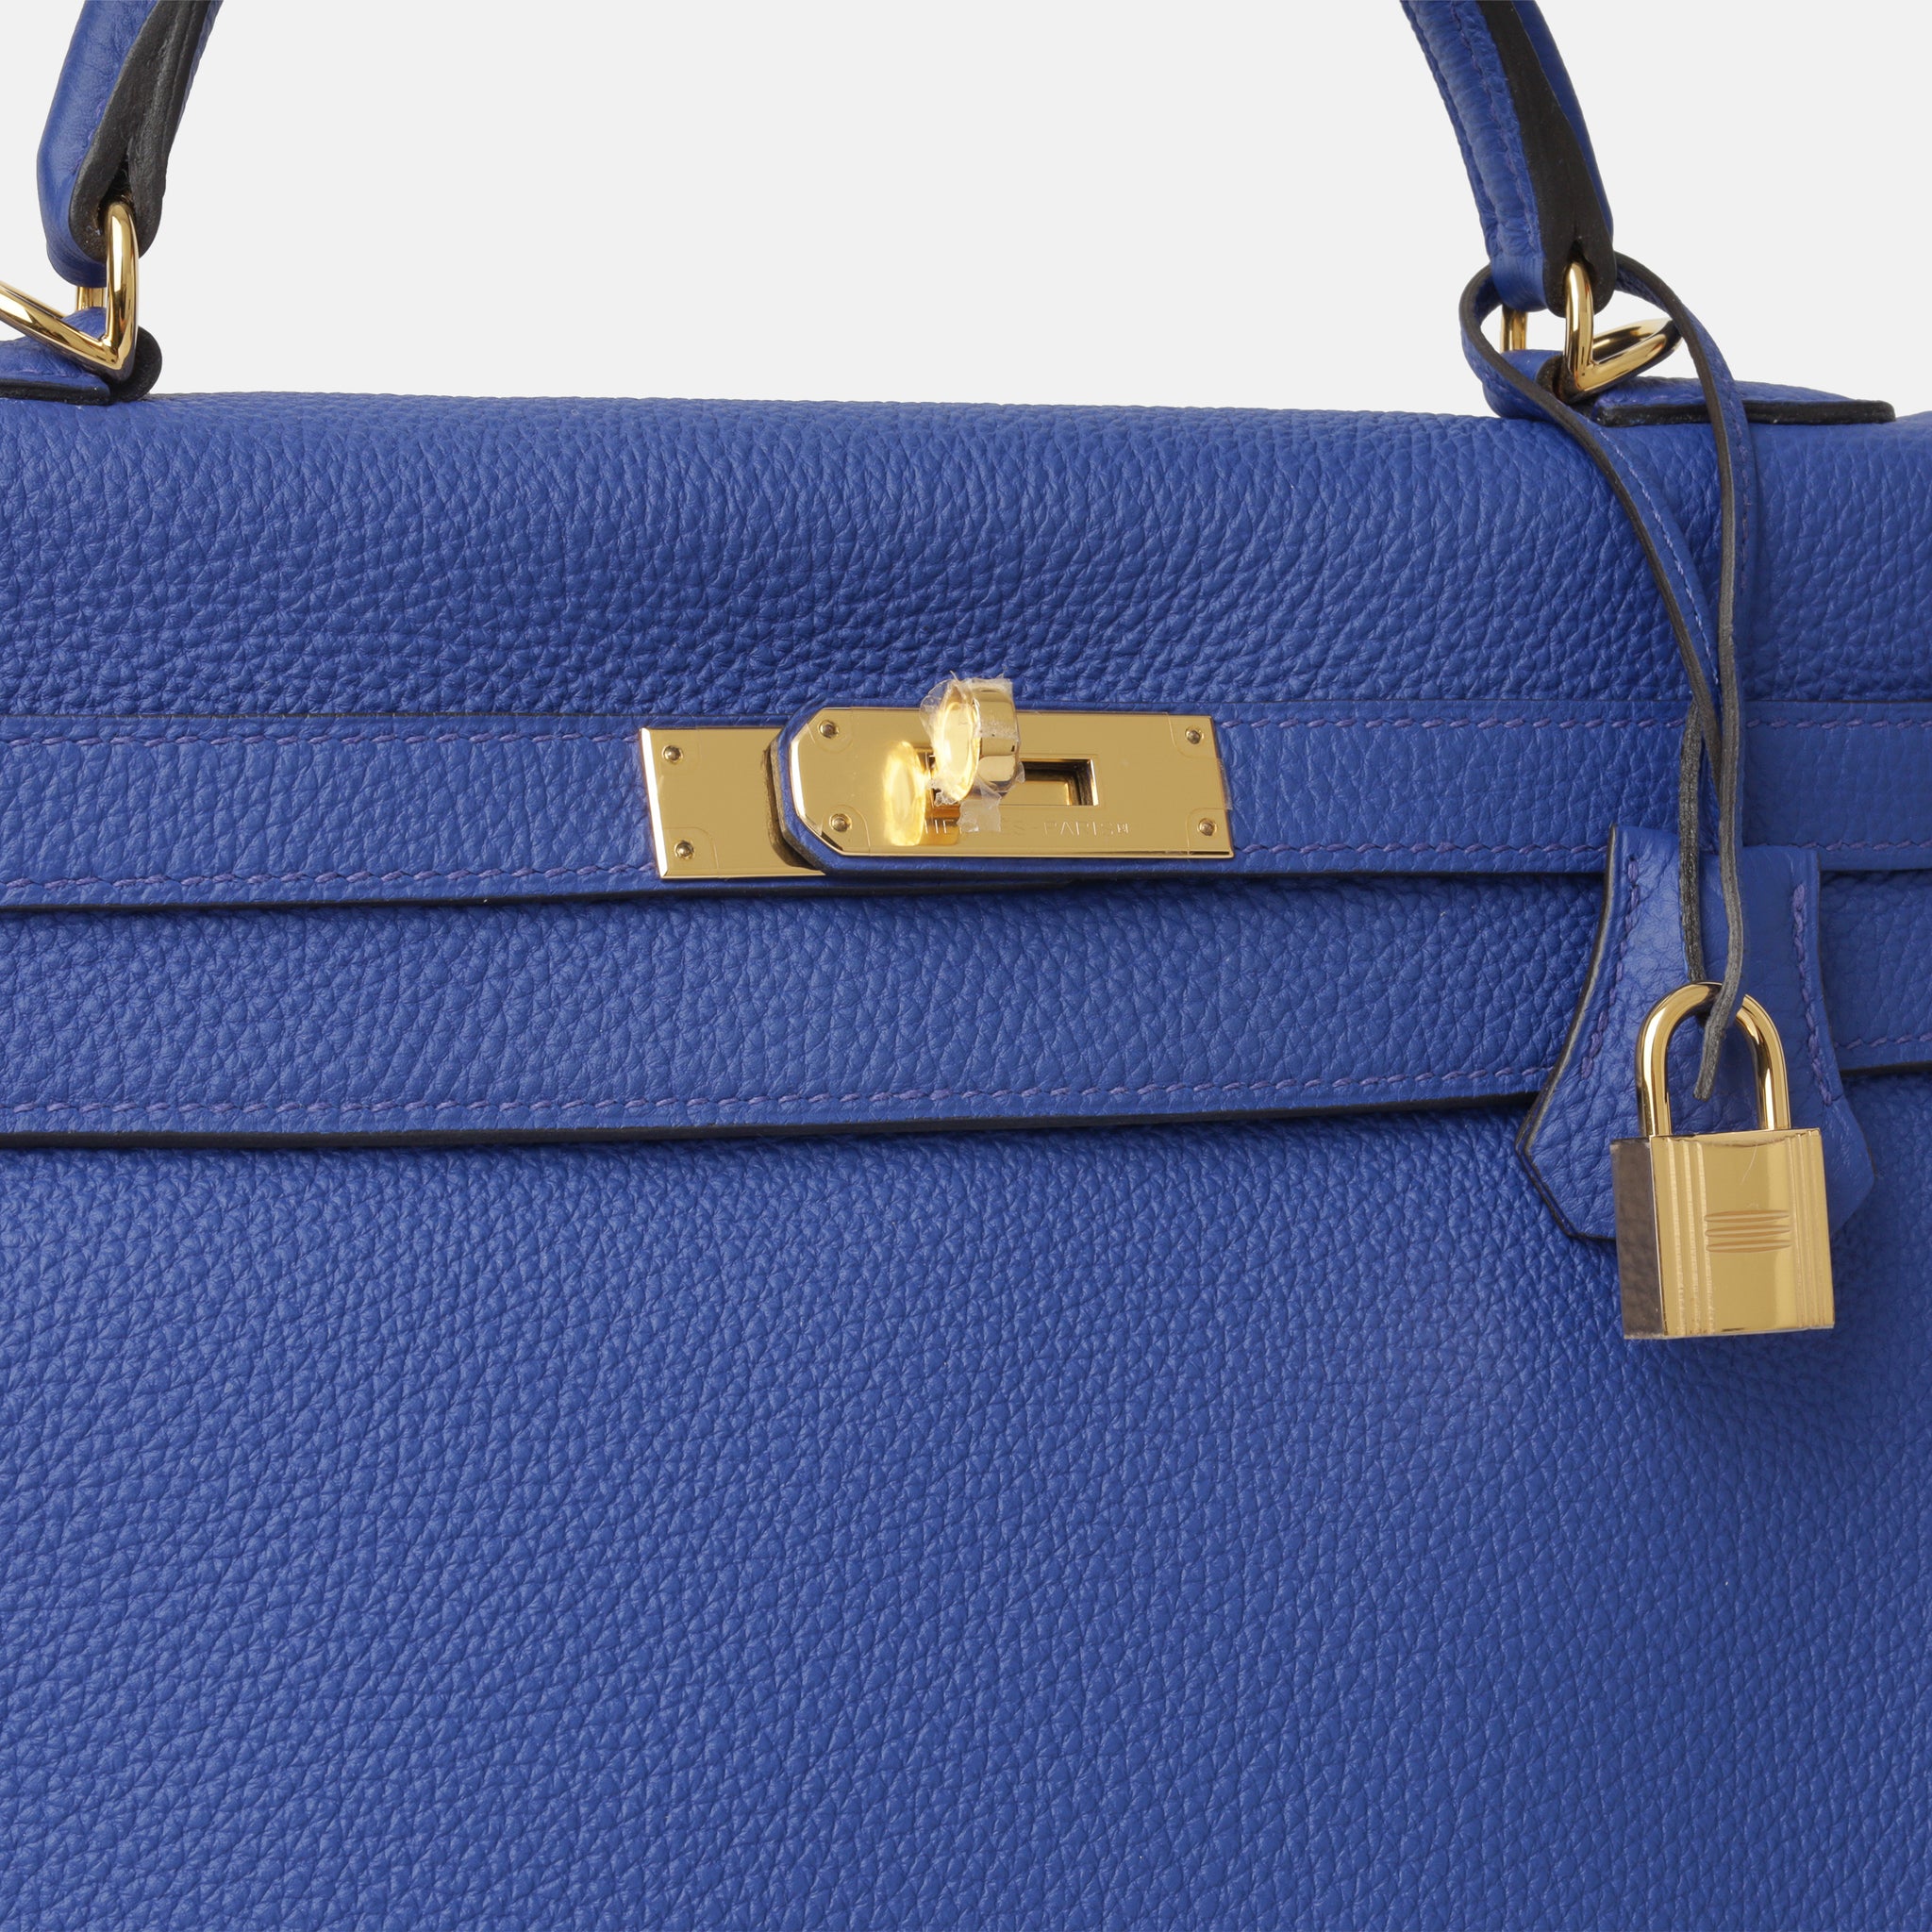 Hermes Kelly 28 and 32 in Bleu Electrique